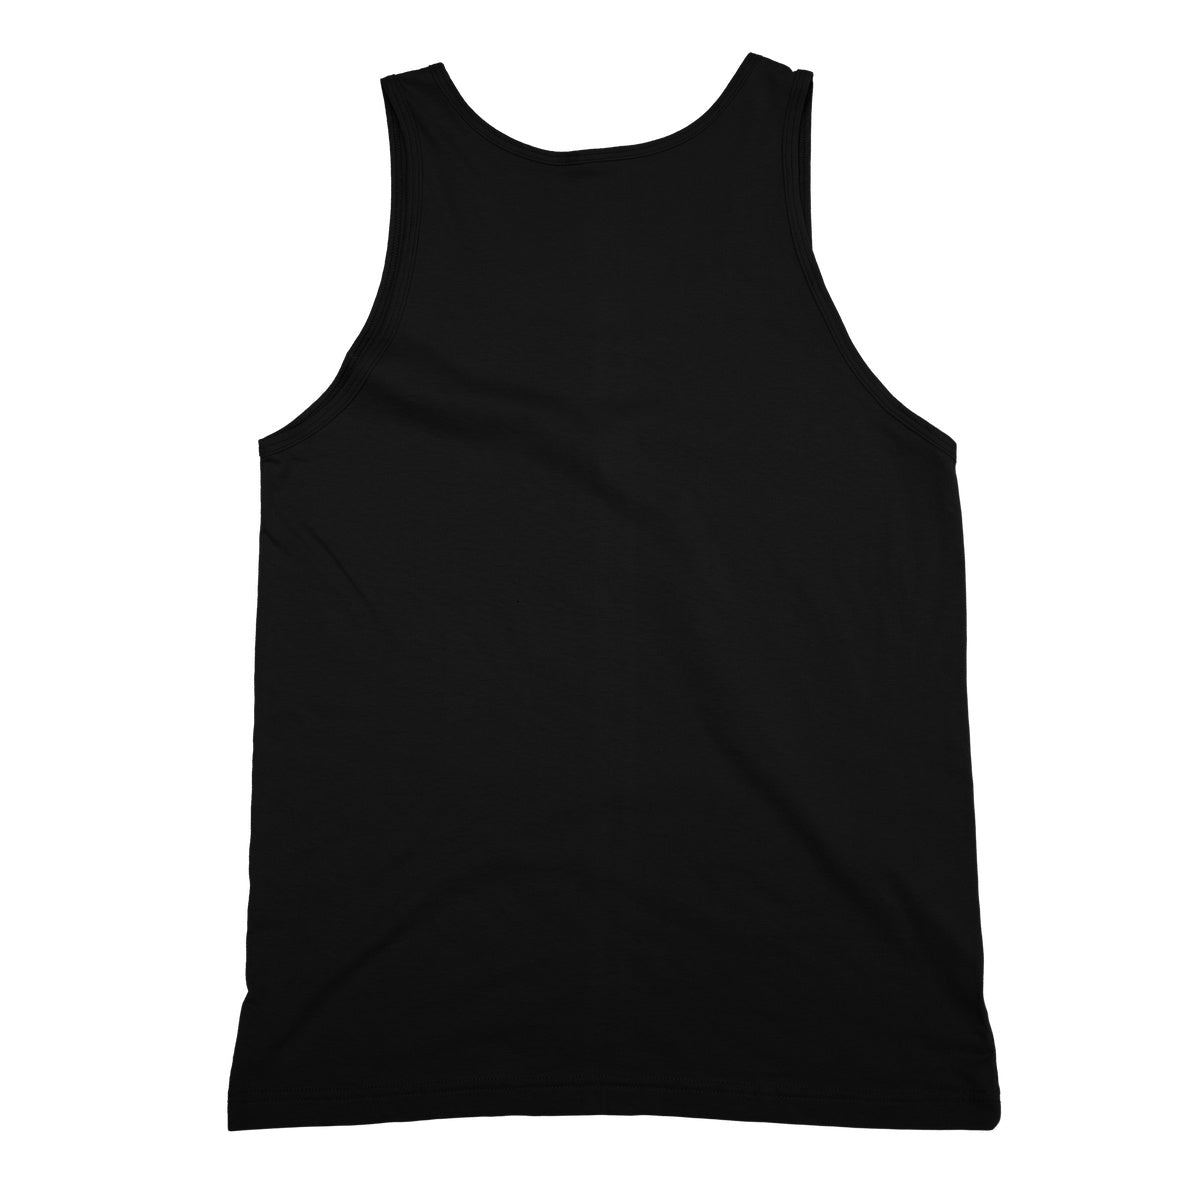 Twelve Sound Waves in a Circle Softstyle Tank Top - Nature of Flowers